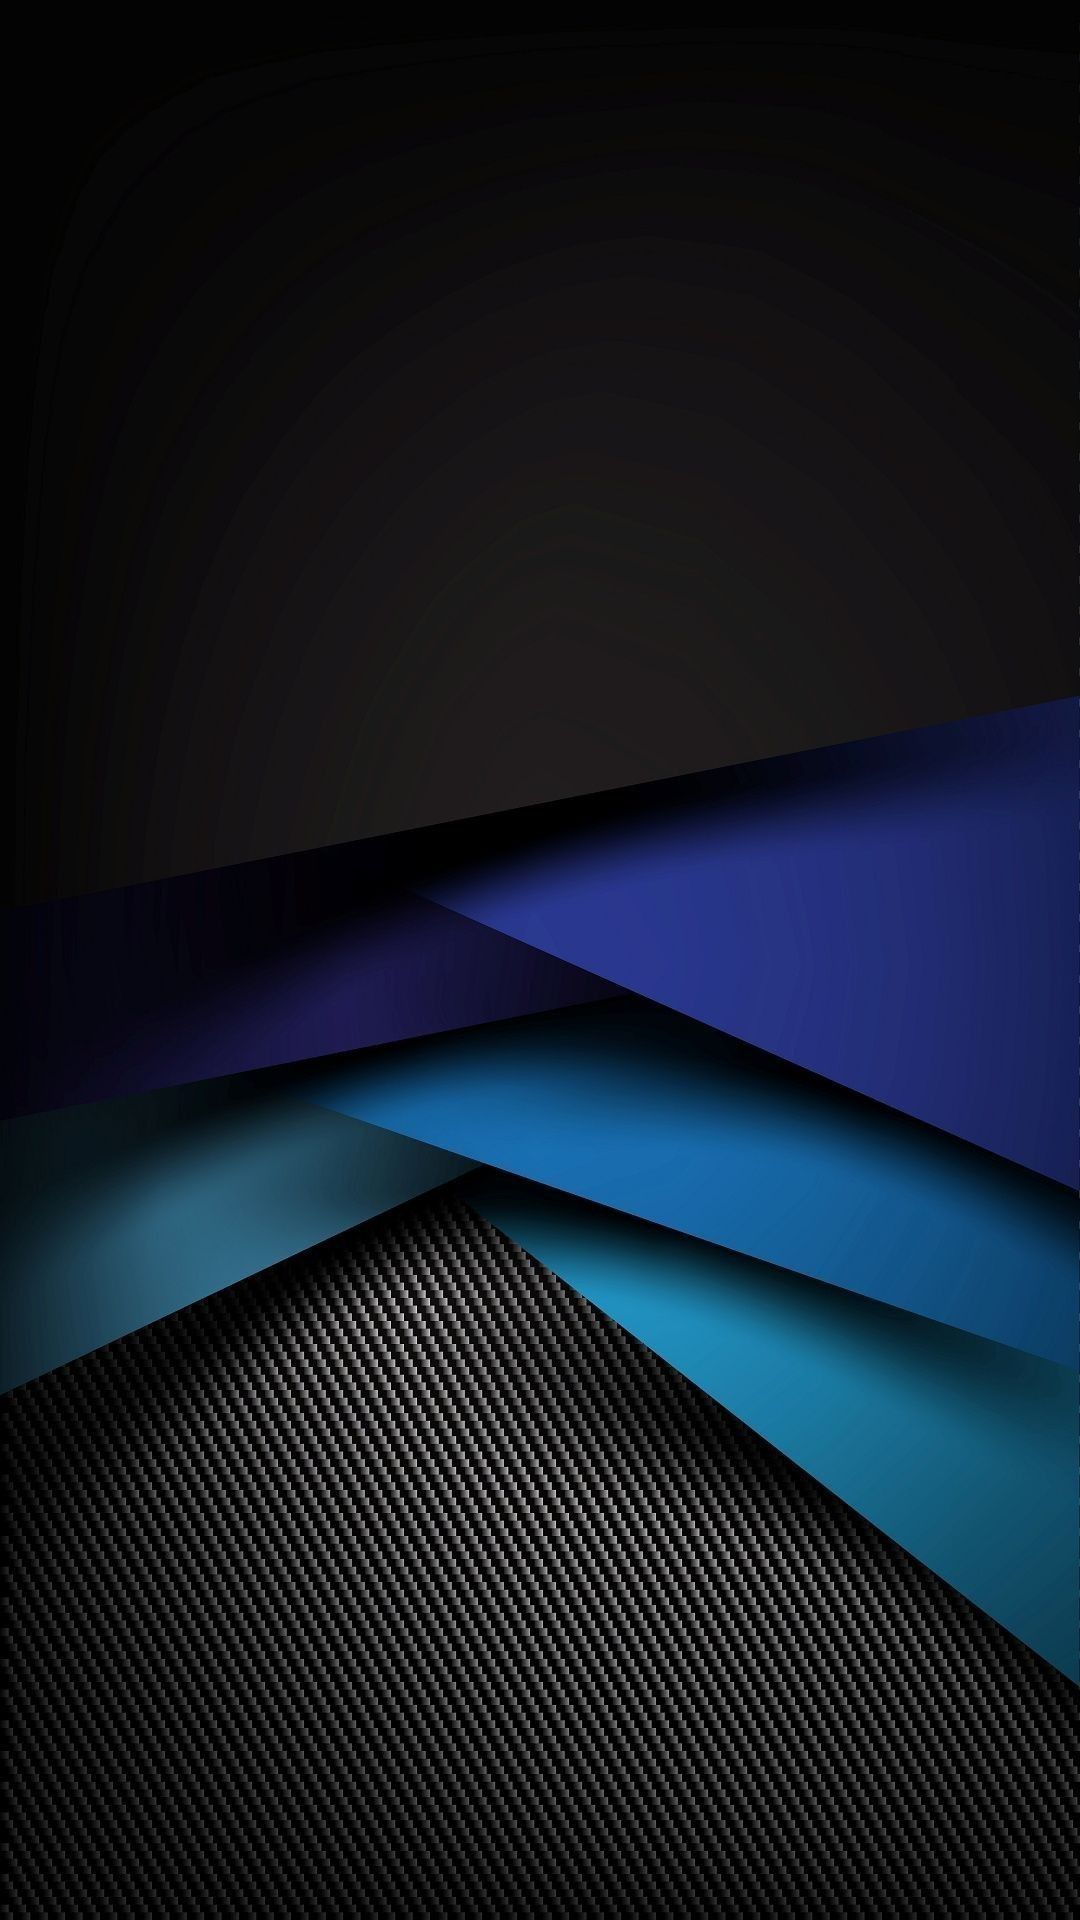 1080x Black And Blue Geometric Abstract Wallpaper And Black Abstract